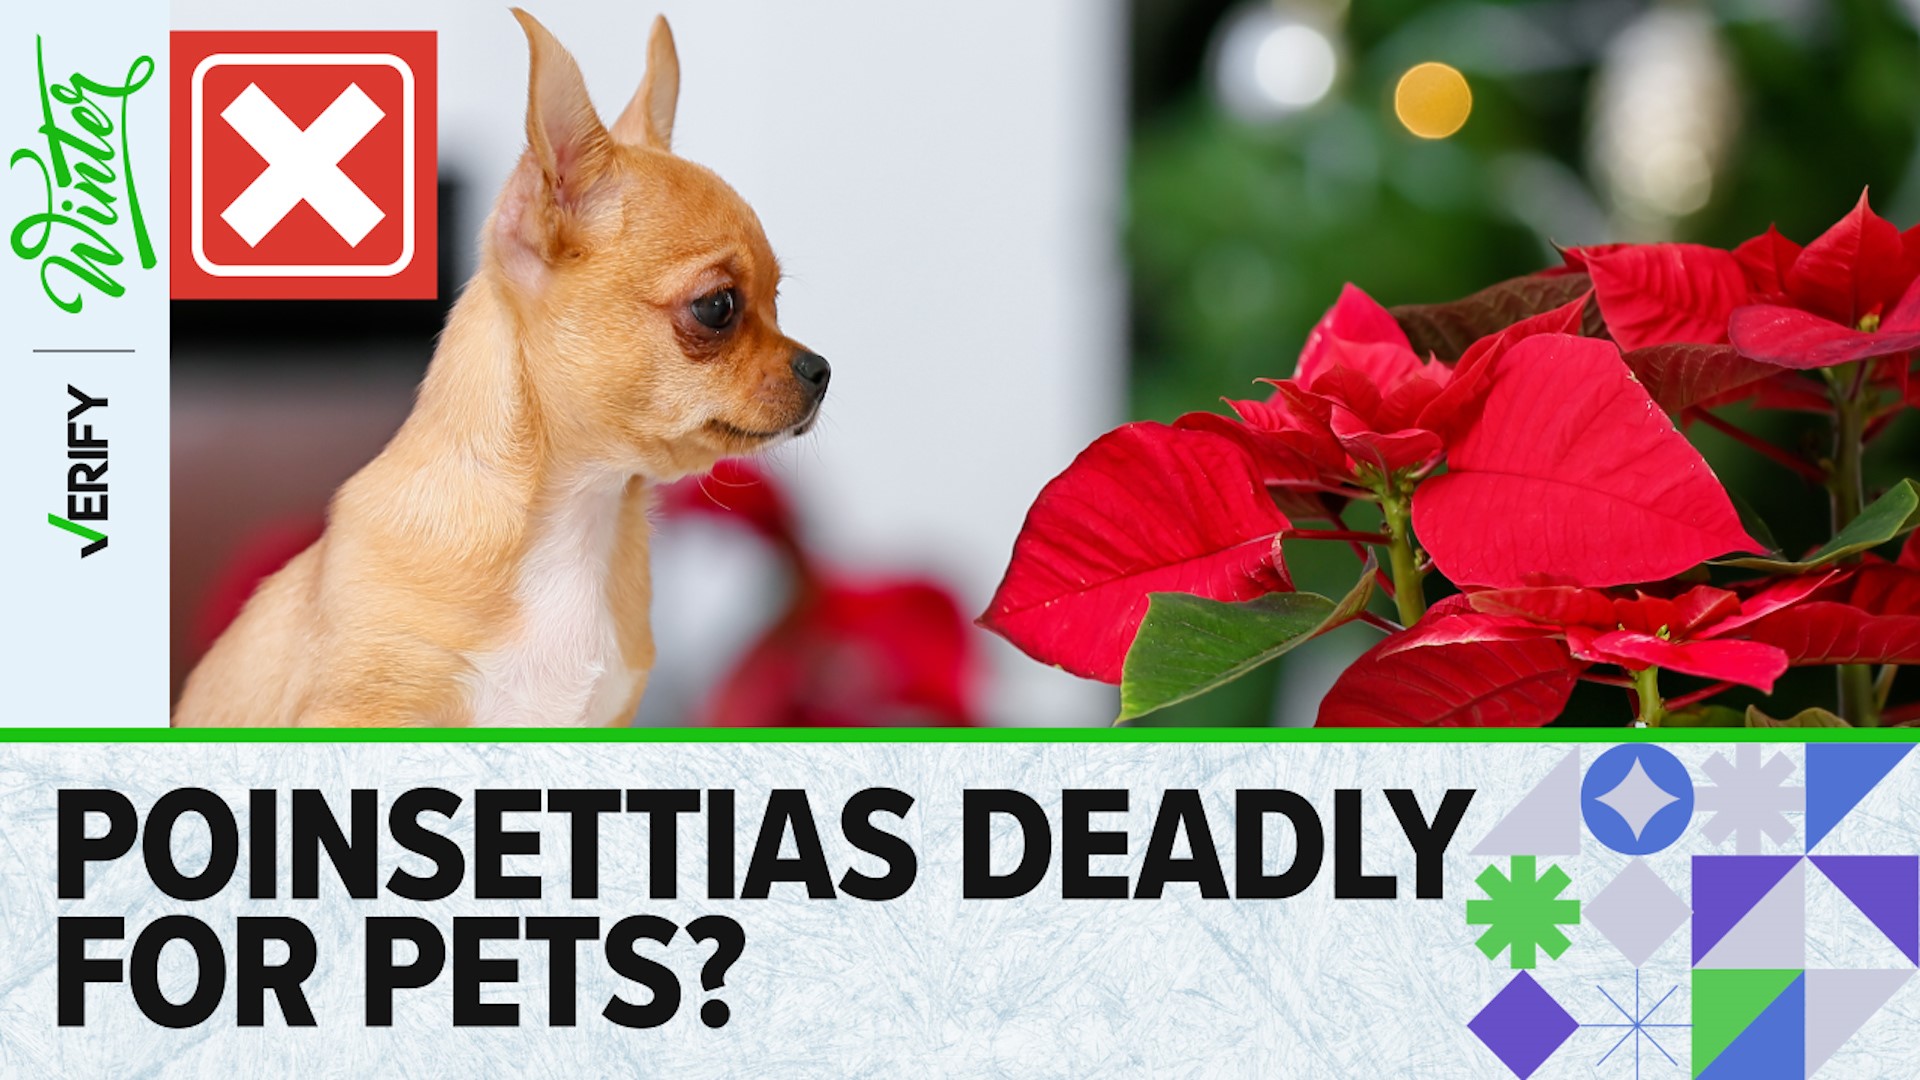 Contrary to popular belief, poinsettias are not deadly to cats and dogs. But they still might get sick if they eat the plant.